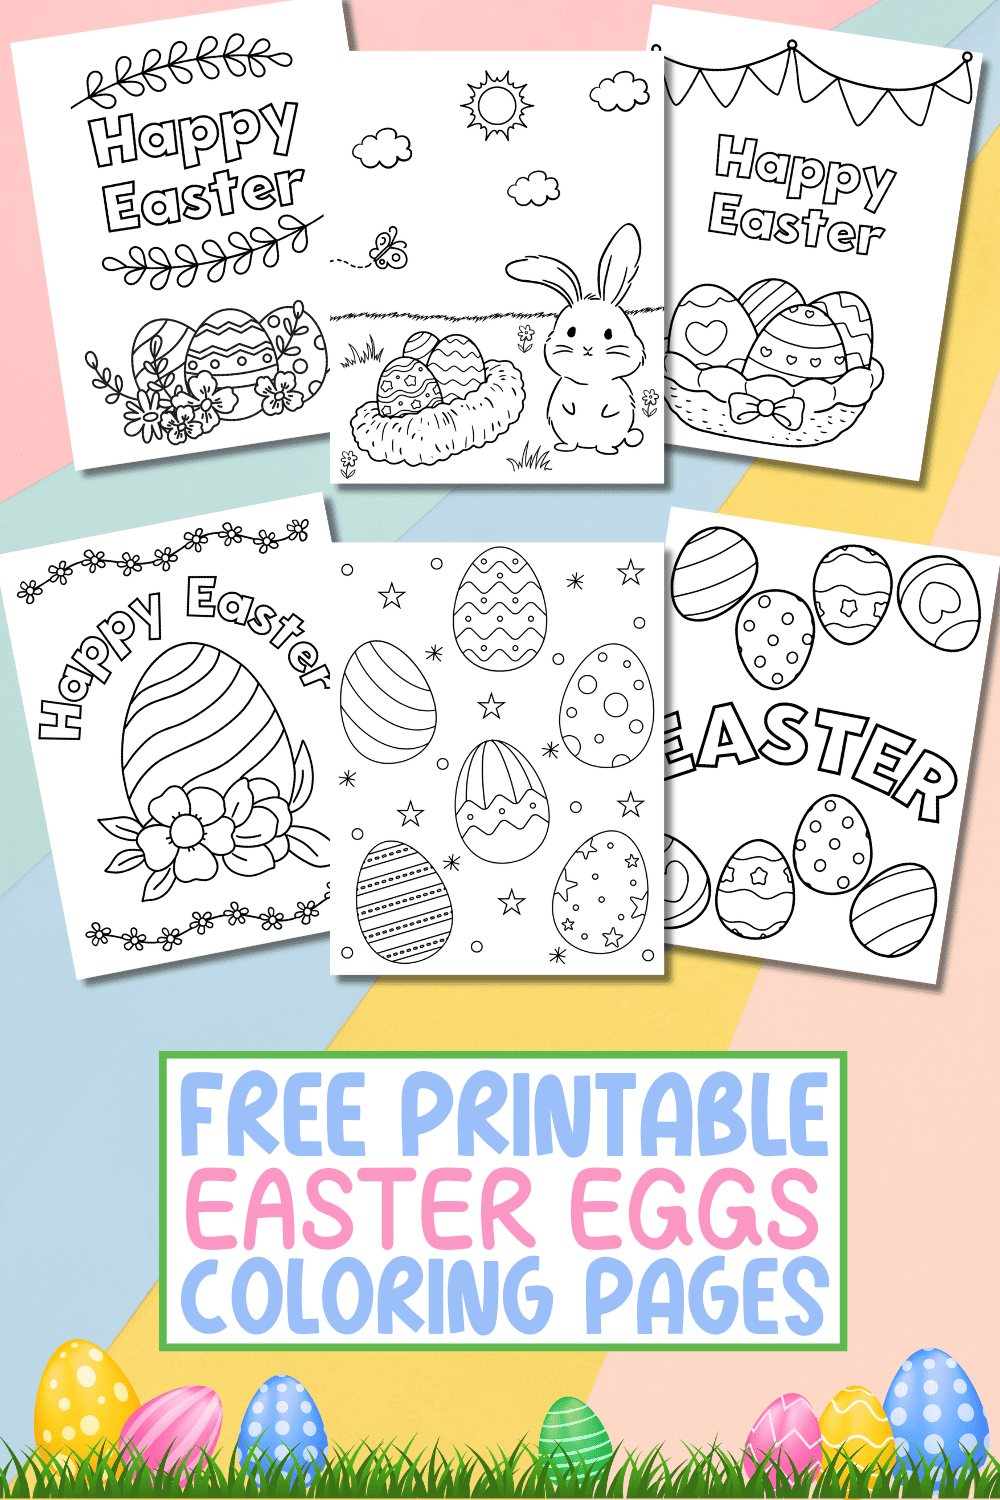 Free Printable Easter Egg Coloring Pages for Kids